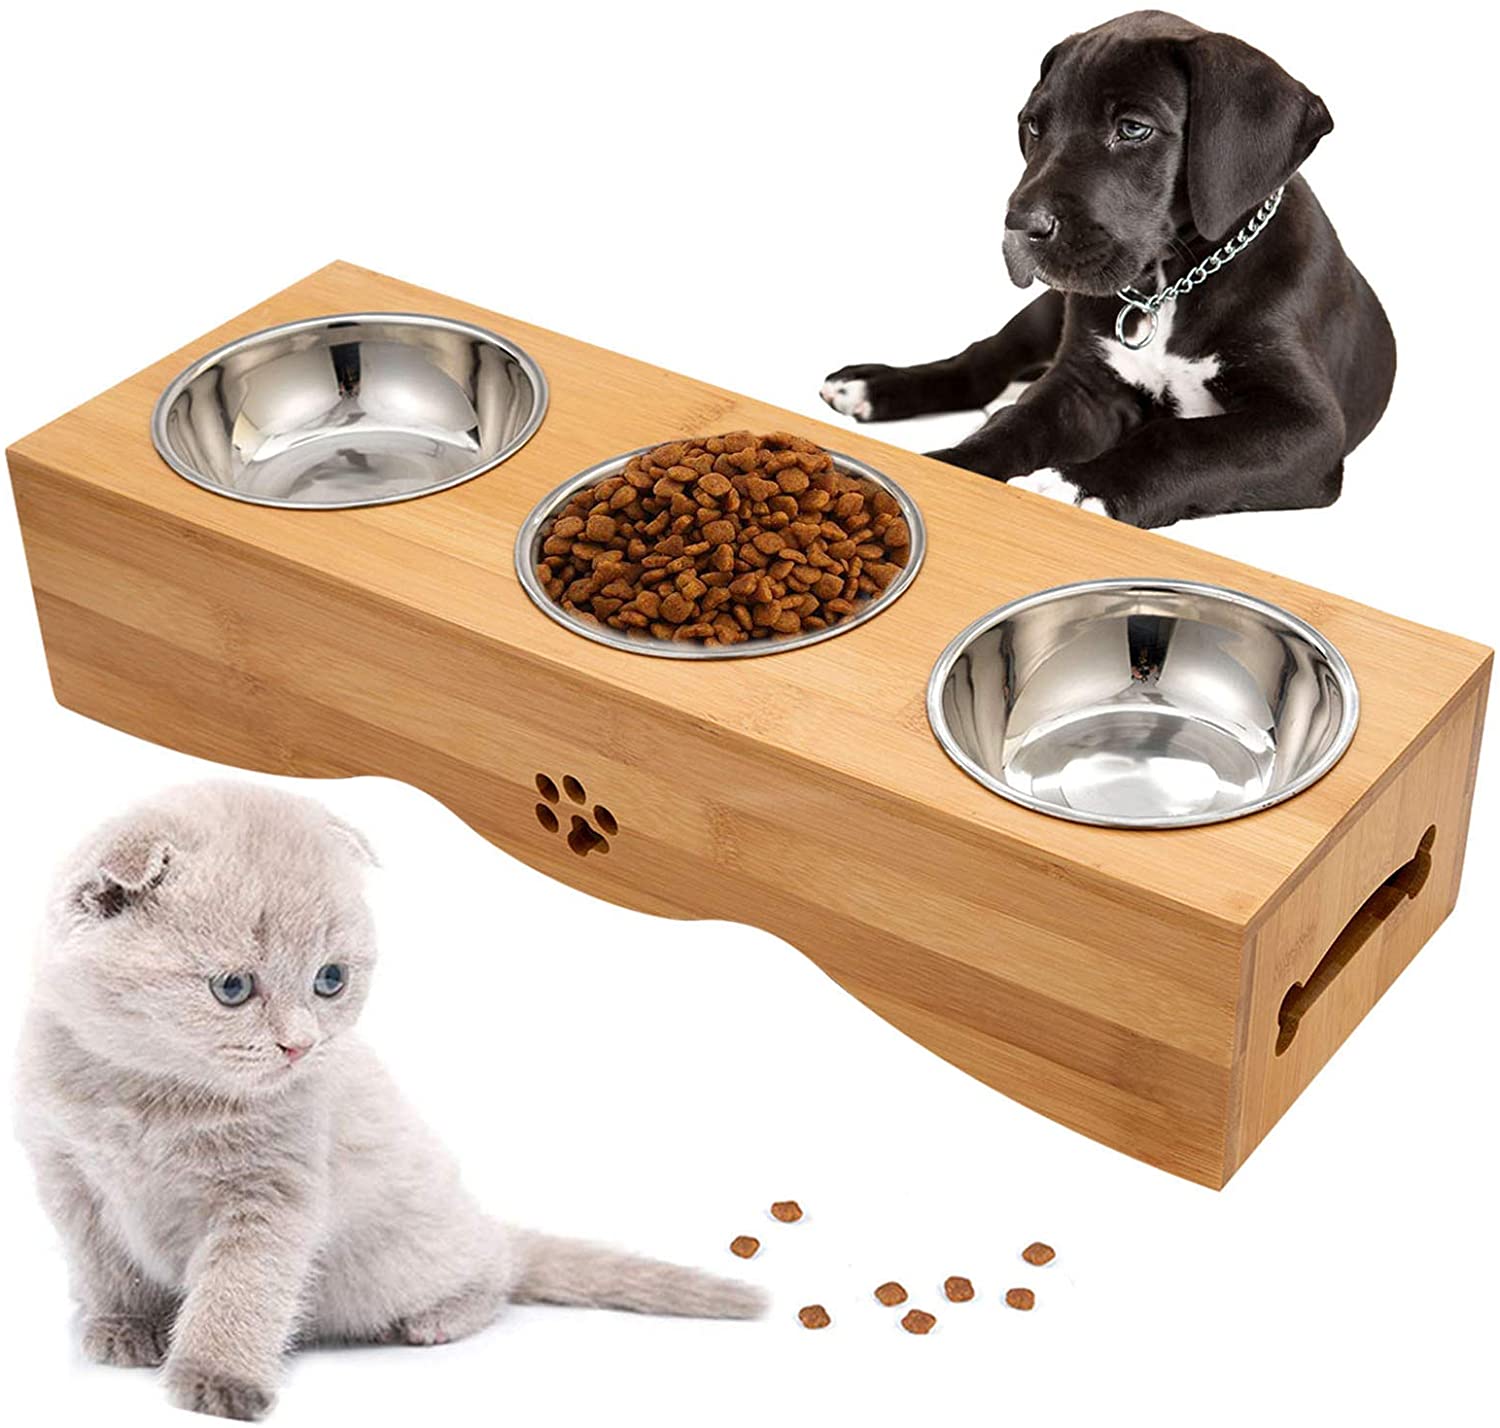 China hot selling Pet Dog Cat Bowls Stand Height Feeding Station with  stainless pet bowl Manufacturers and Suppliers